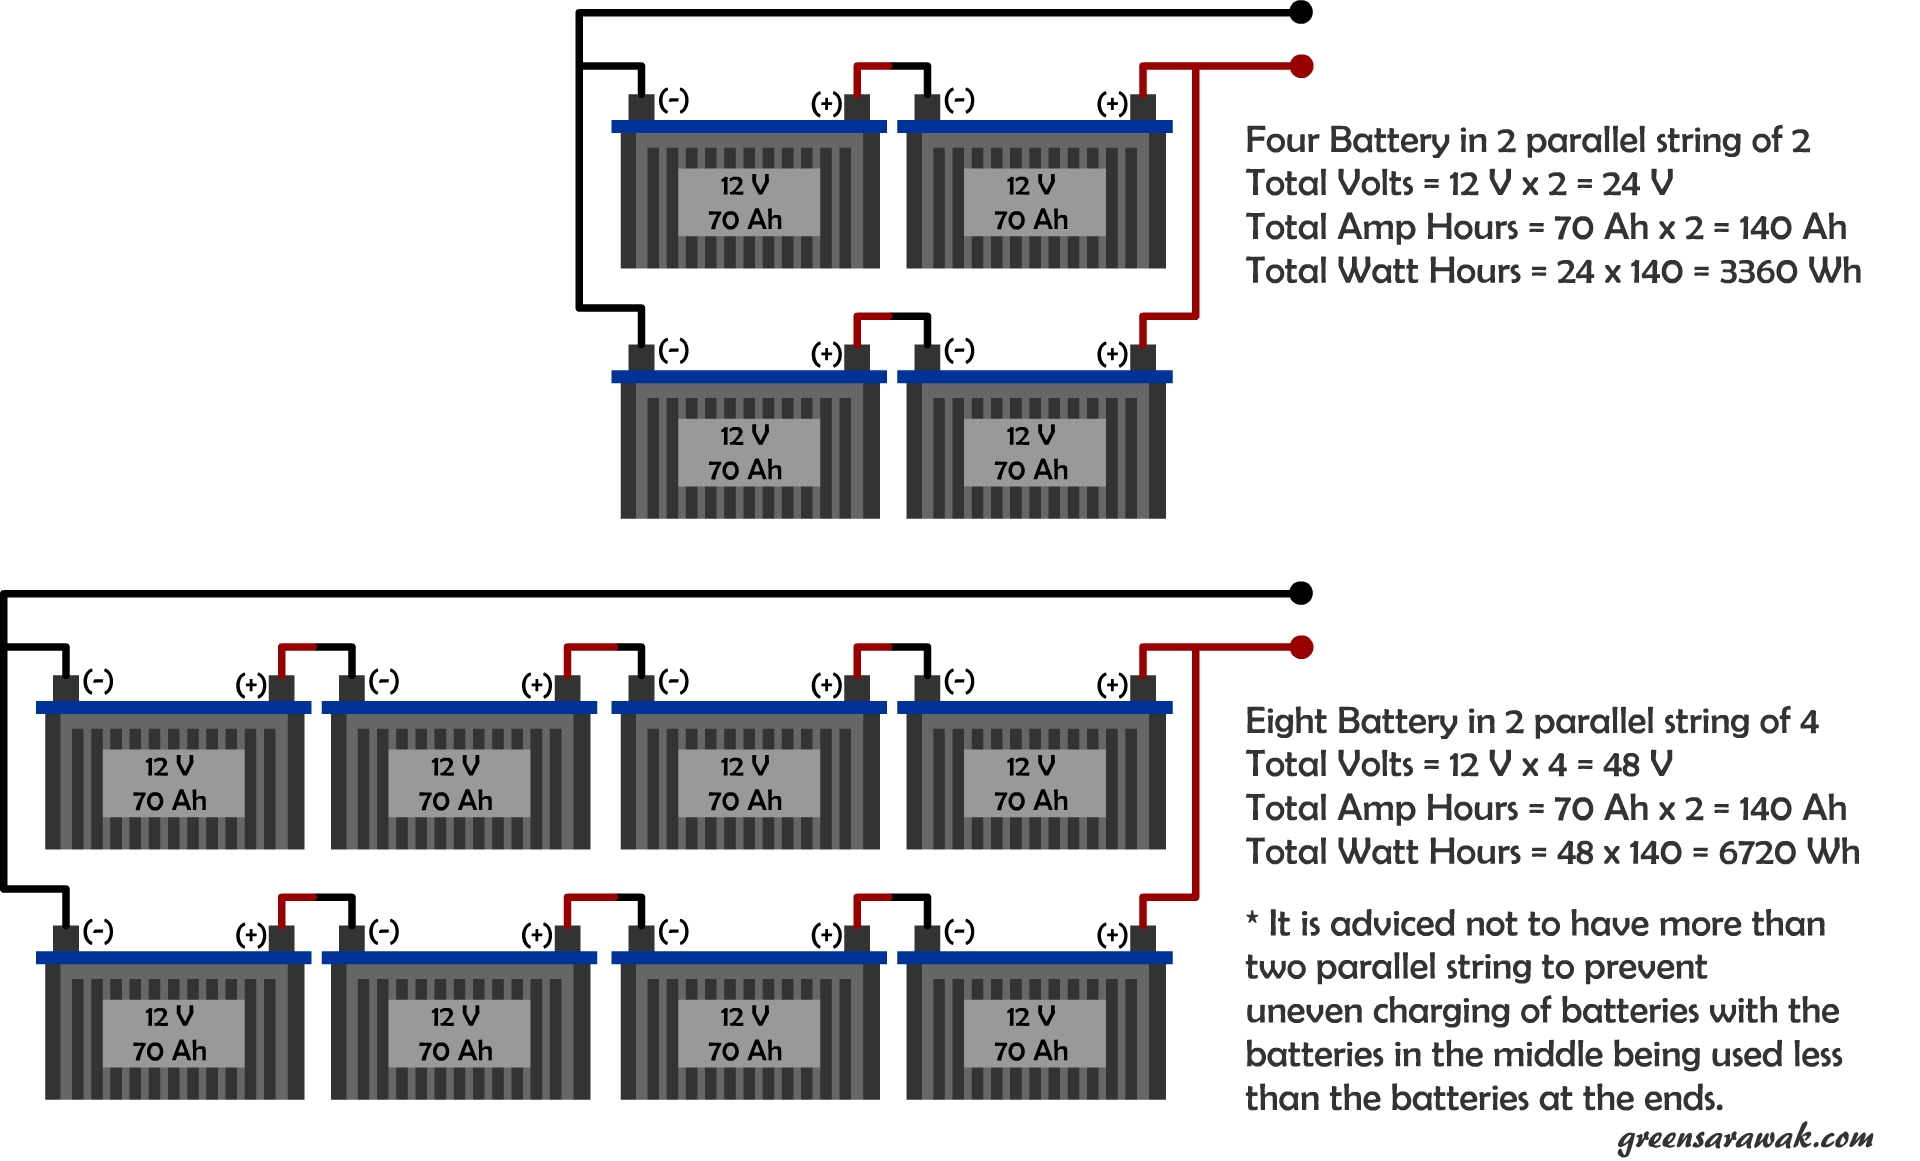 Your battery has. Аккумуляторы в параллель. Parallel connection of Batteries. Parallel connection of photoelectric Batteries. Parallel 1s Battery.